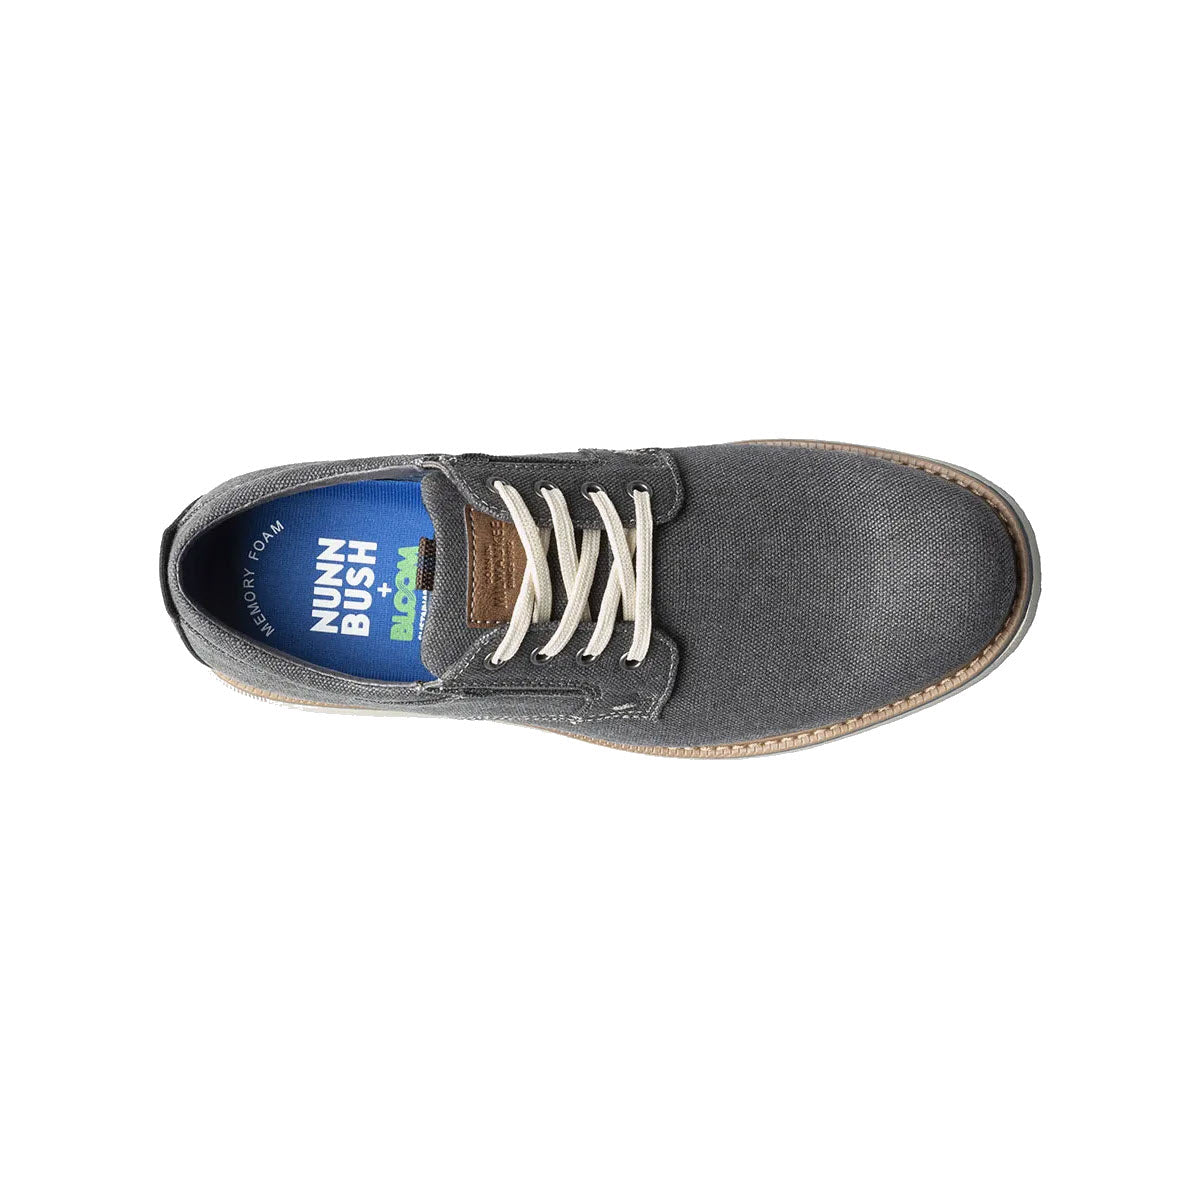 A single dark gray Nunn Bush Otto canvas plain toe oxford with white laces and a visible blue insole, viewed from above on a white background.